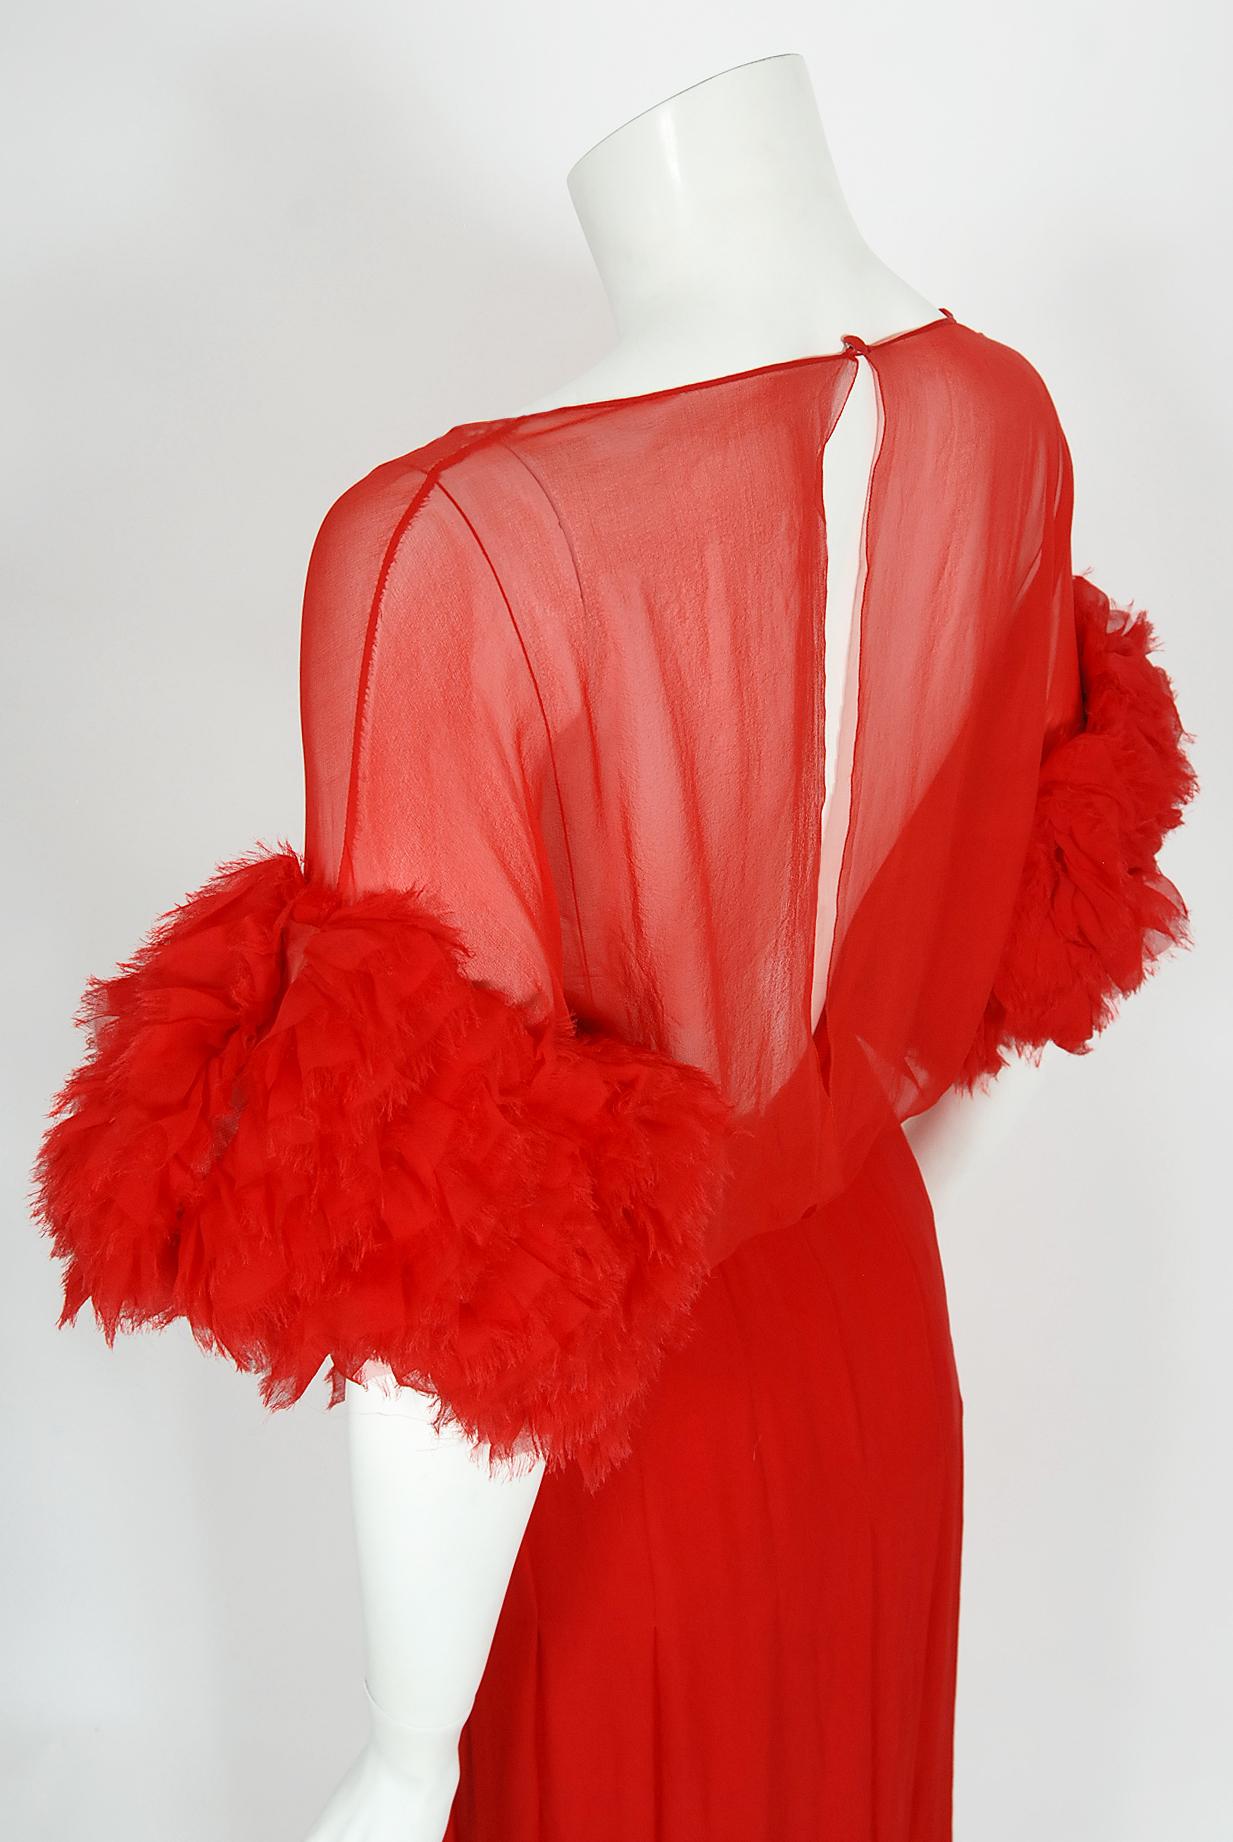 Vintage 1984 Chanel by Karl Lagerfeld Runway Red Silk Chiffon Ruffle-Sleeve Gown 8